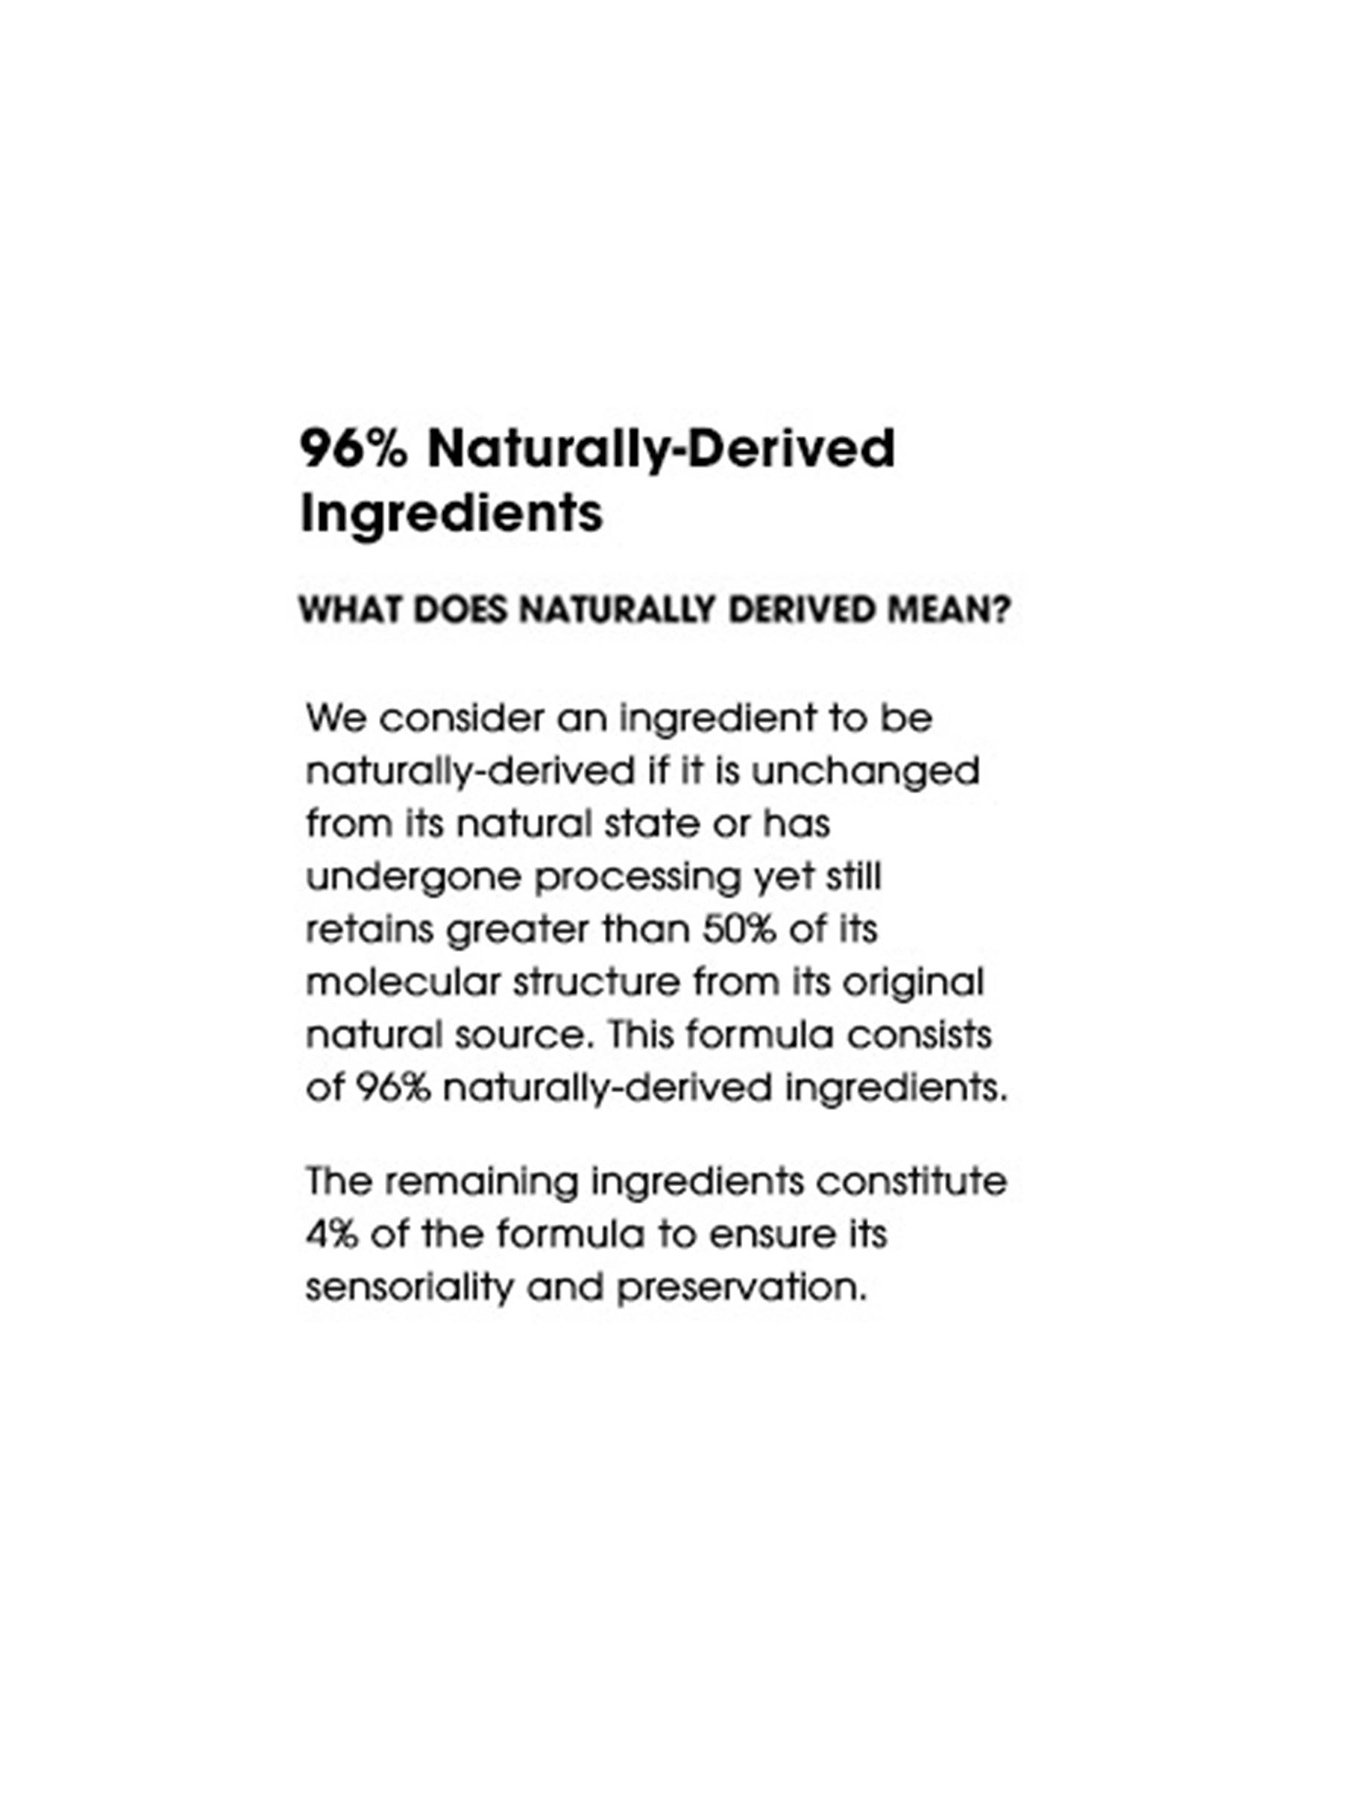 96% Naturally-Derived Ingredients. What does naturally derived mean? We consider an ingredient to be naturally-derived if it is unchanged from its natural state or has undergone processing yet still retains greater than 50% of its molecular structure from its original natural source. This formula consists of 96% naturally-derived ingredients. The remaining ingredients constitute 4% of the formula to ensure its sensoriality and preservation.